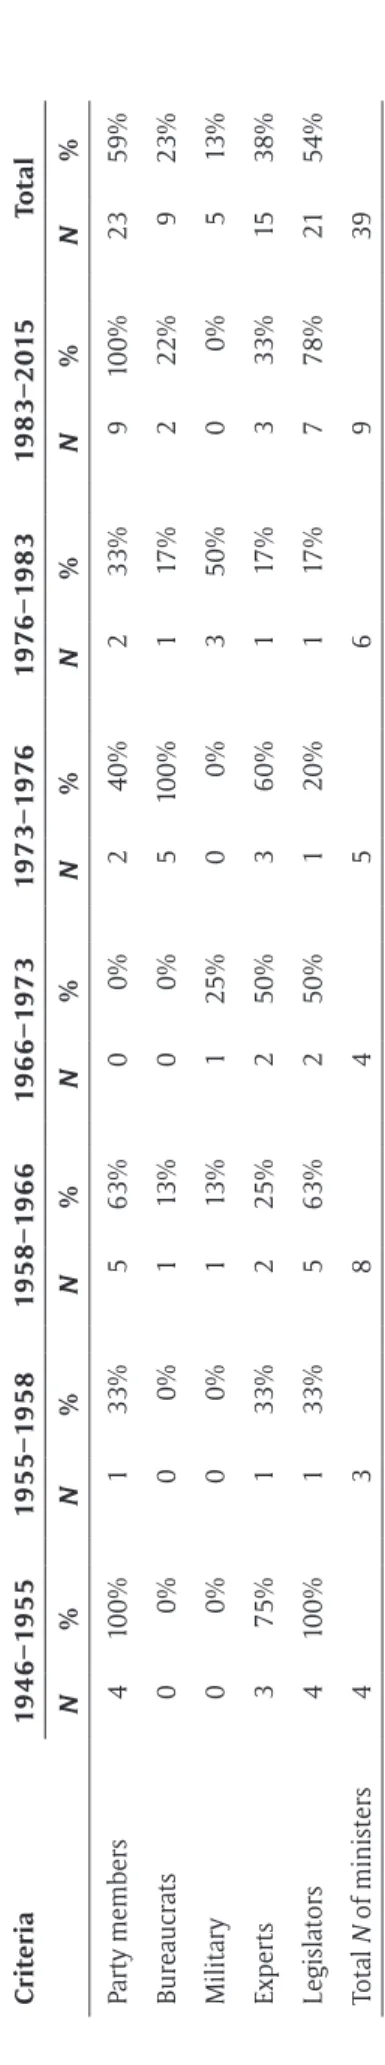 Table 2: Criteria for the selection of Argentine foreign ministers by regime, 1946–2015